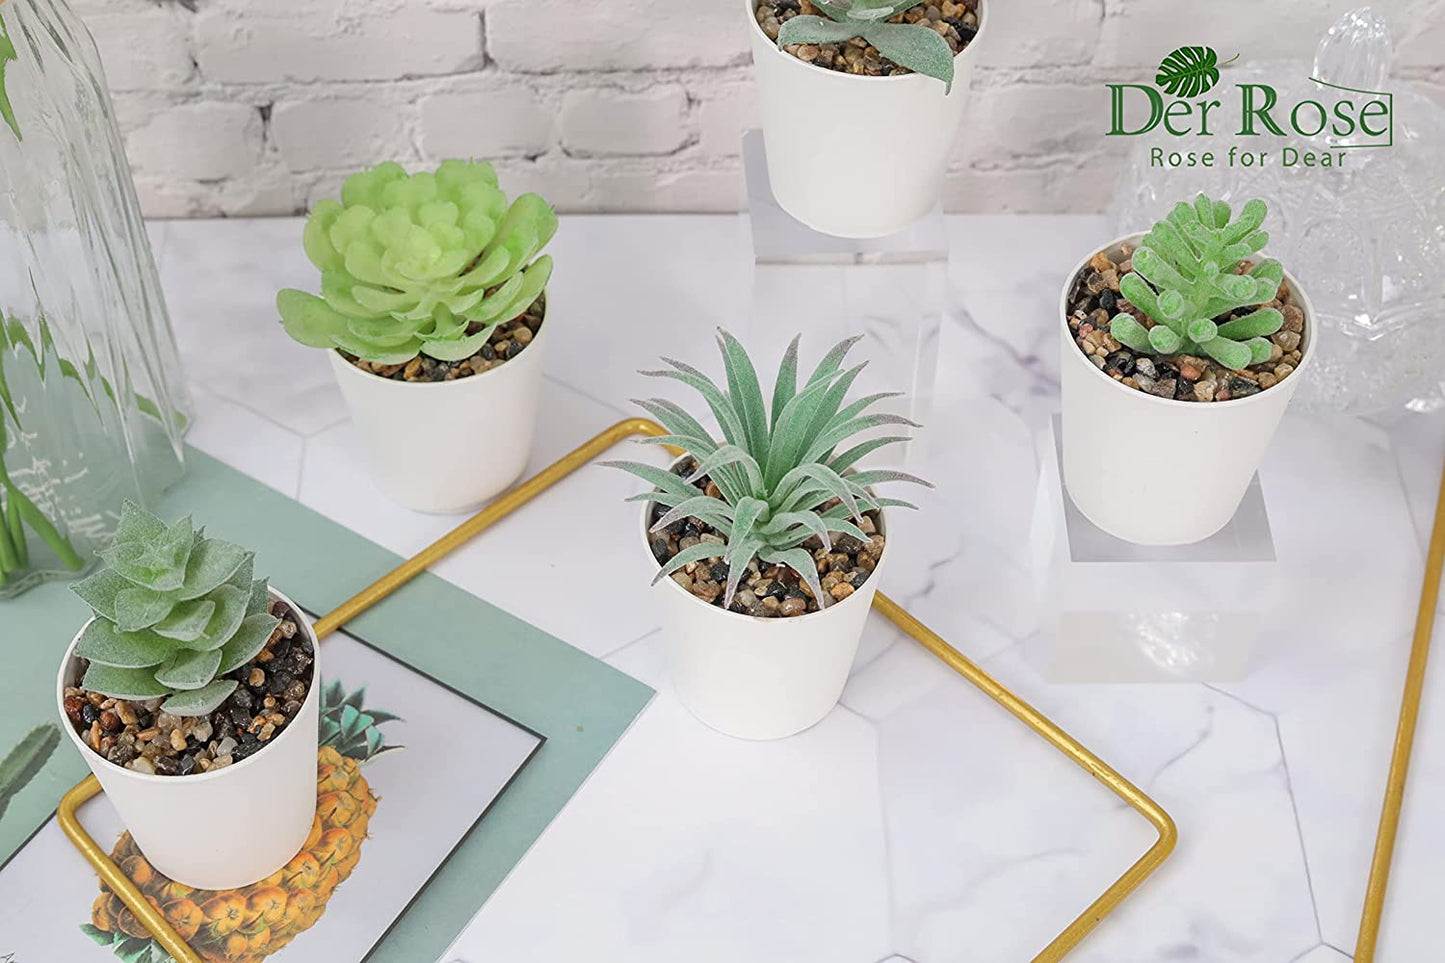 Set of 6 Fake Plants Succulents Plants Artificial in Pots for Bedroom Aesthetic Living Room Bathroom Office Home Decor